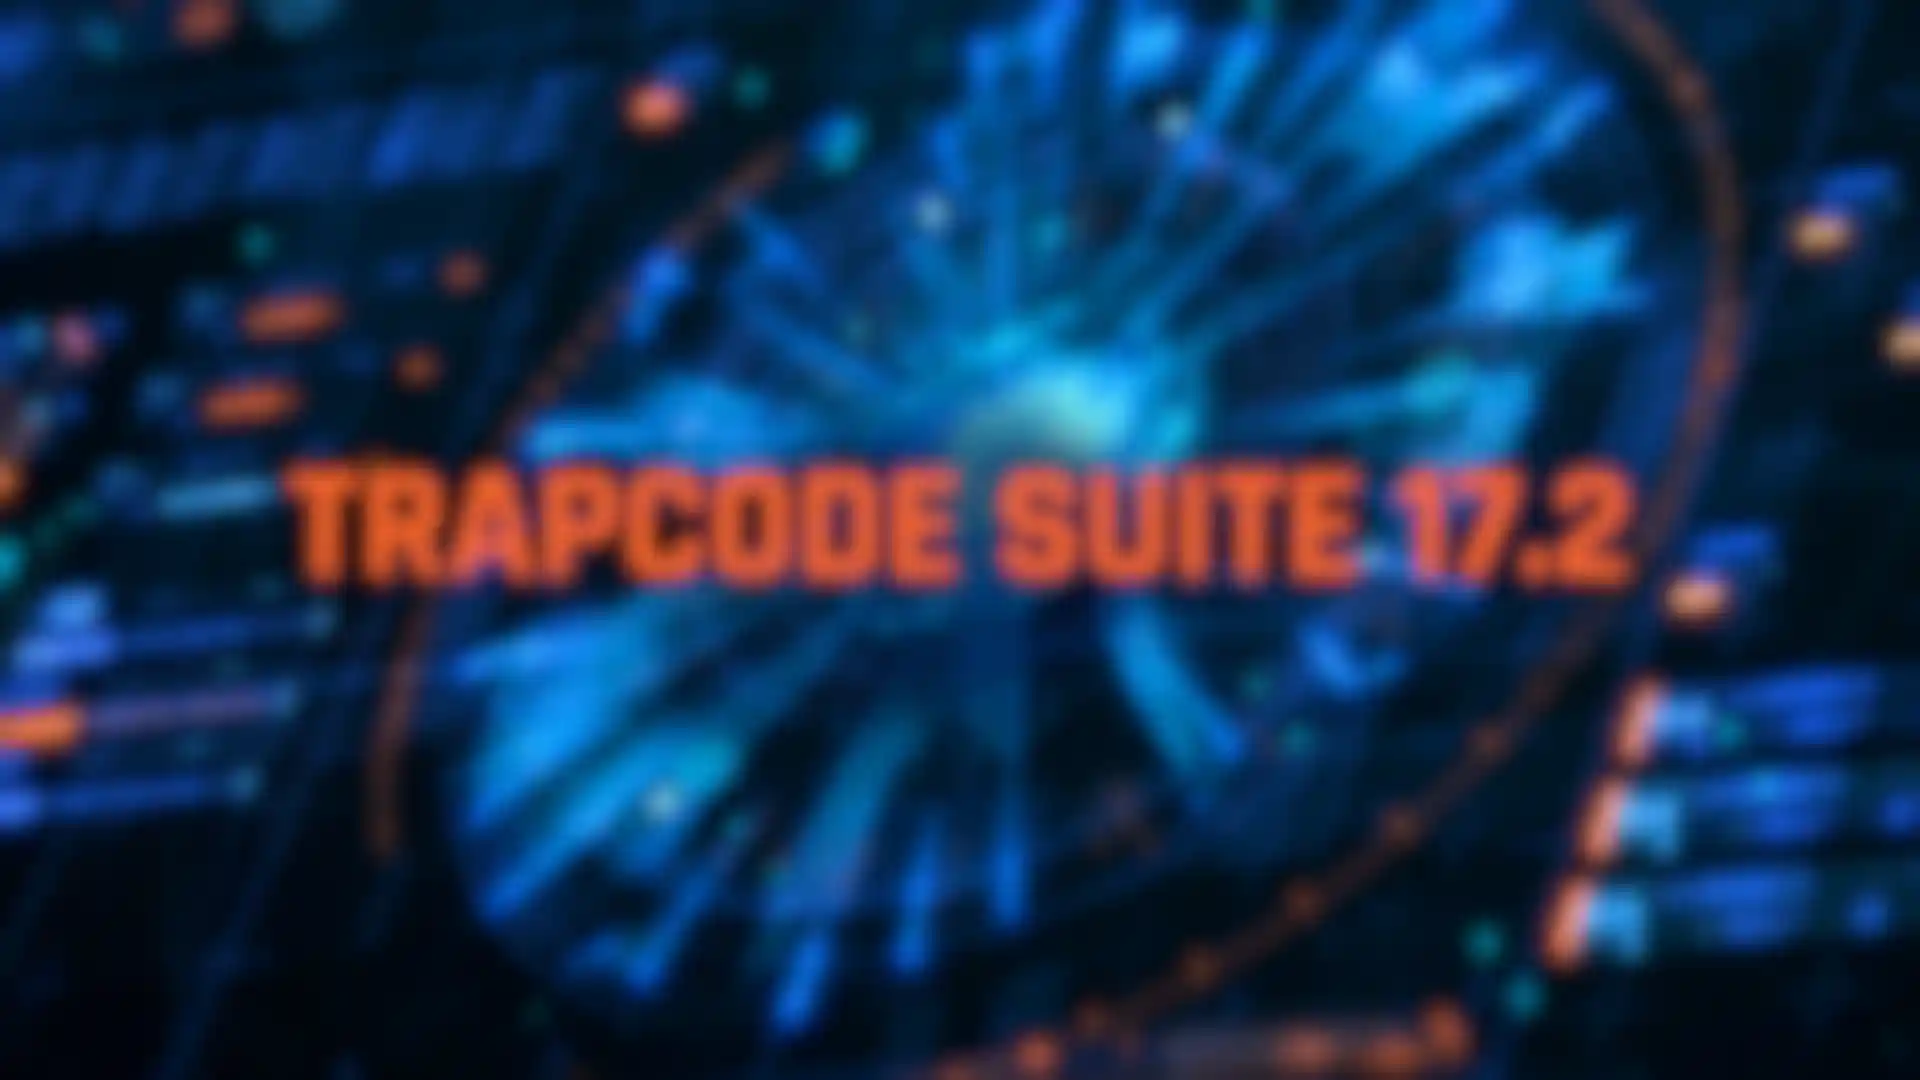 Trapcode Suite 17.2 발표 image